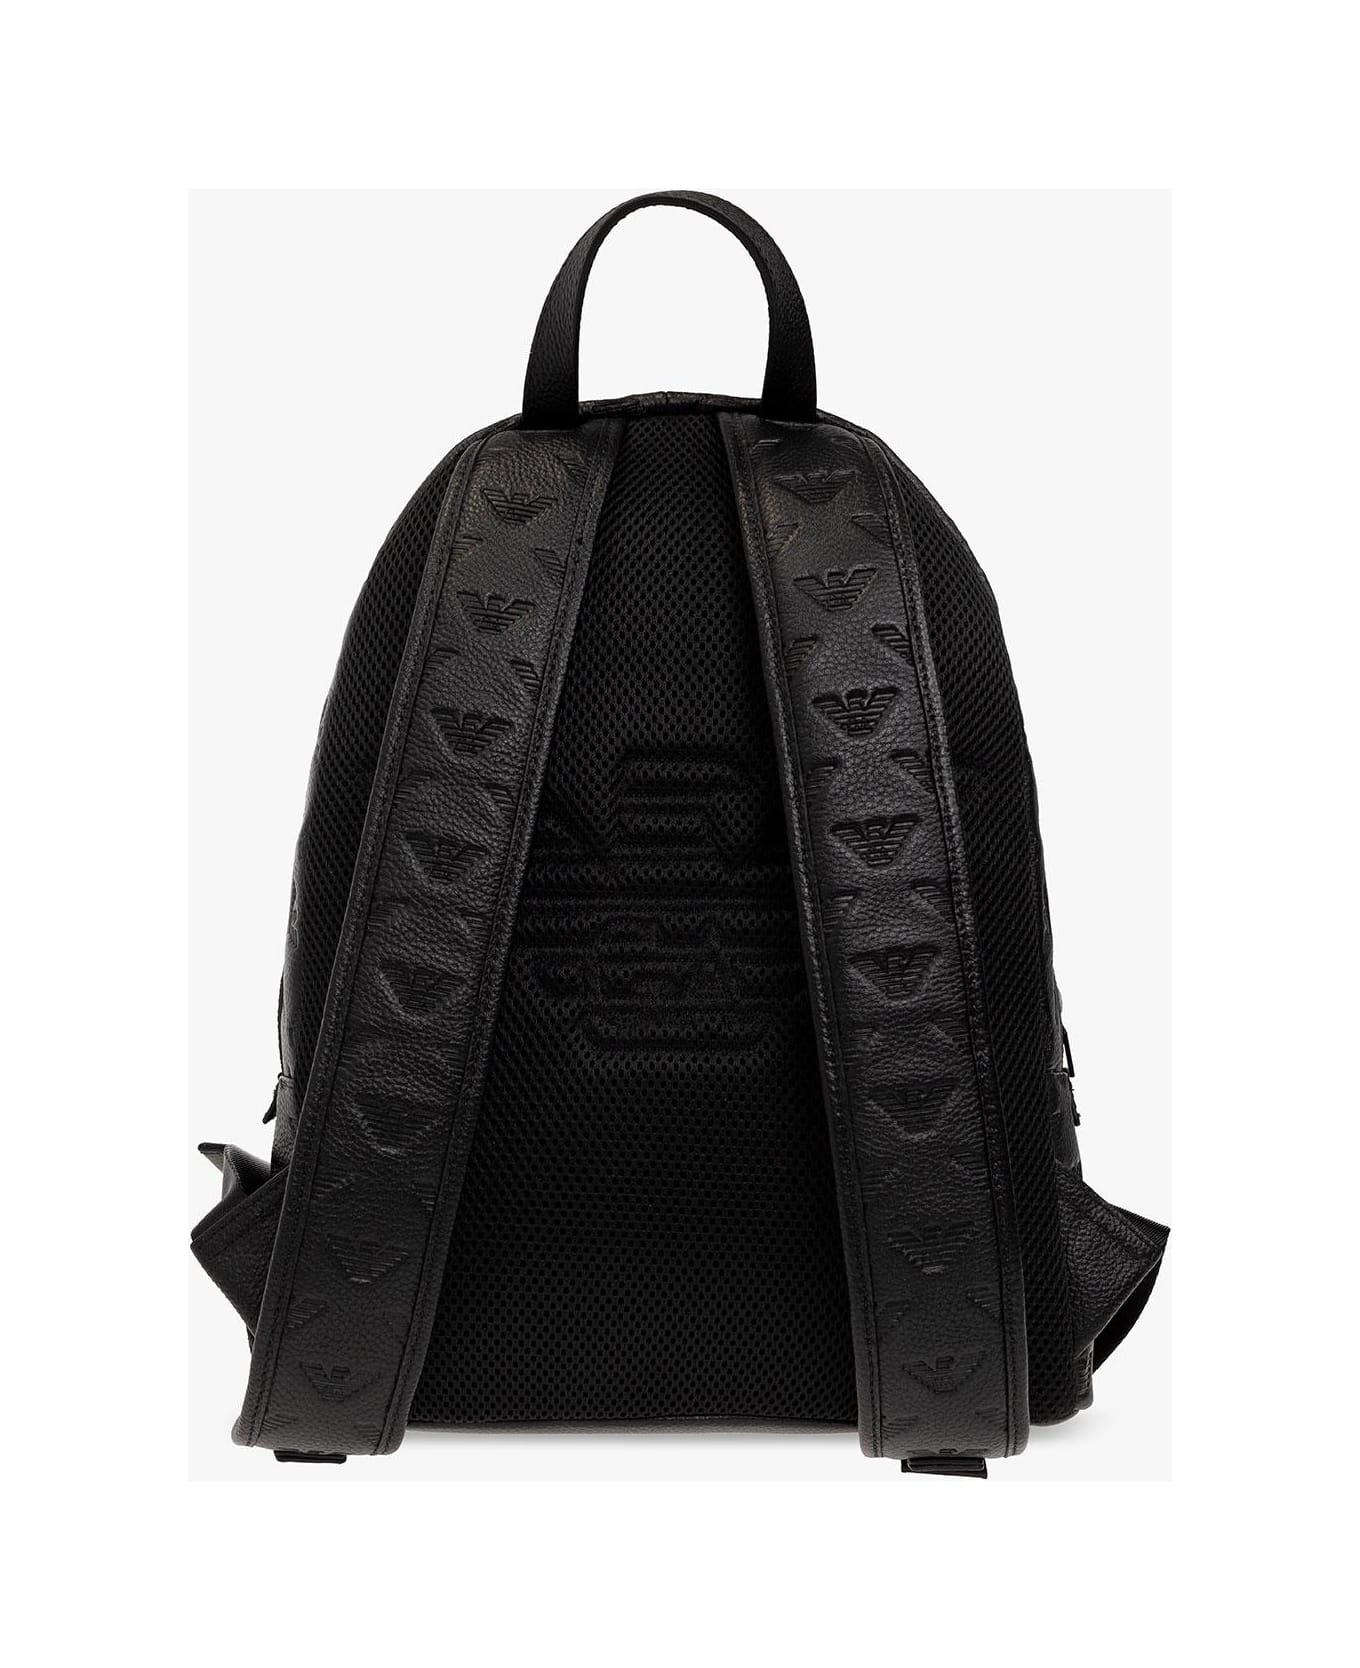 Emporio Armani Embossed Leather Backpack - Black